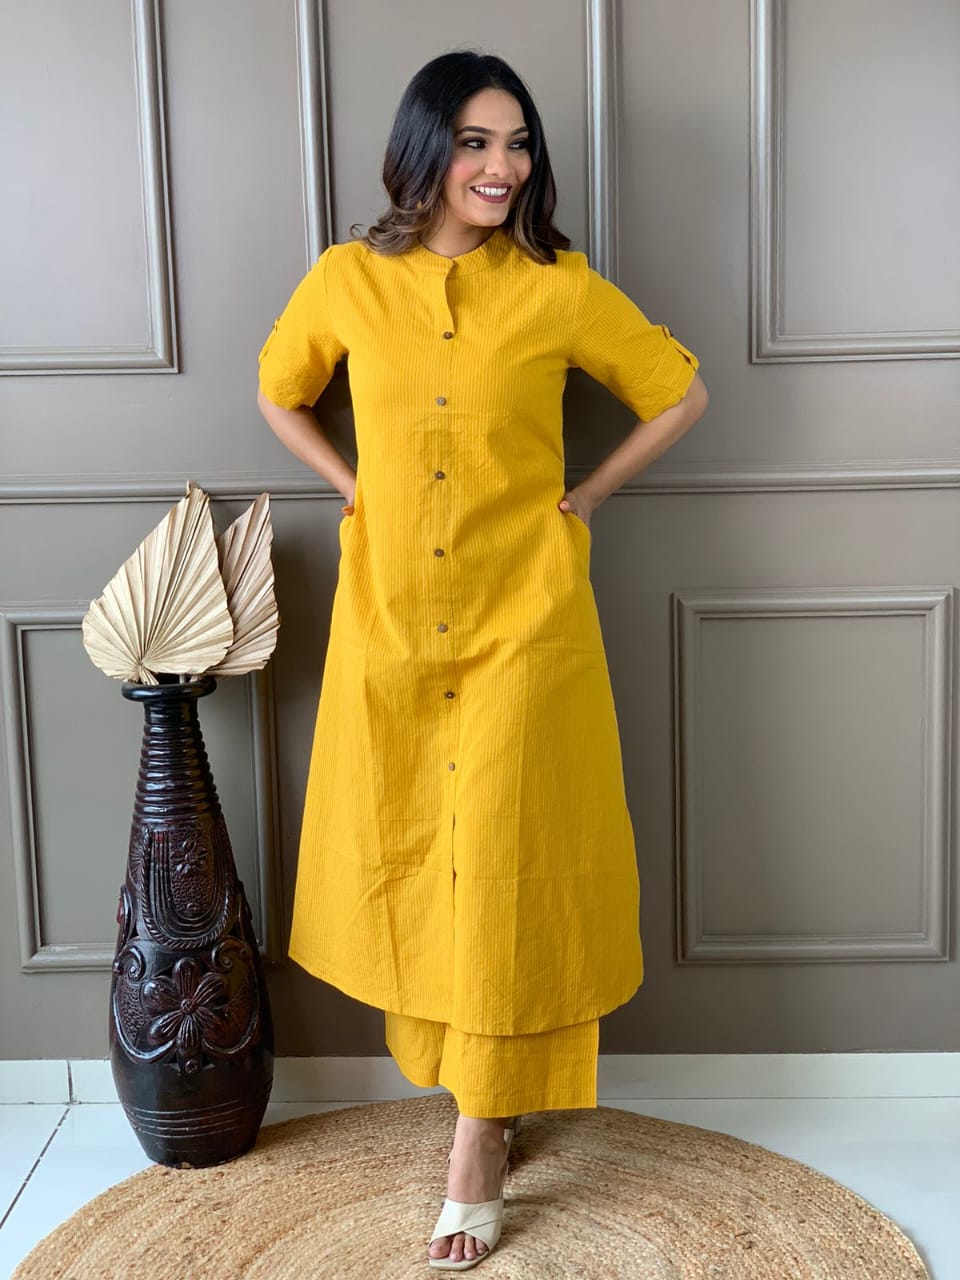 Kurti – An Innovative Outfit To Style Your Jeans With | Kurta designs  women, Kurti designs, Fashion